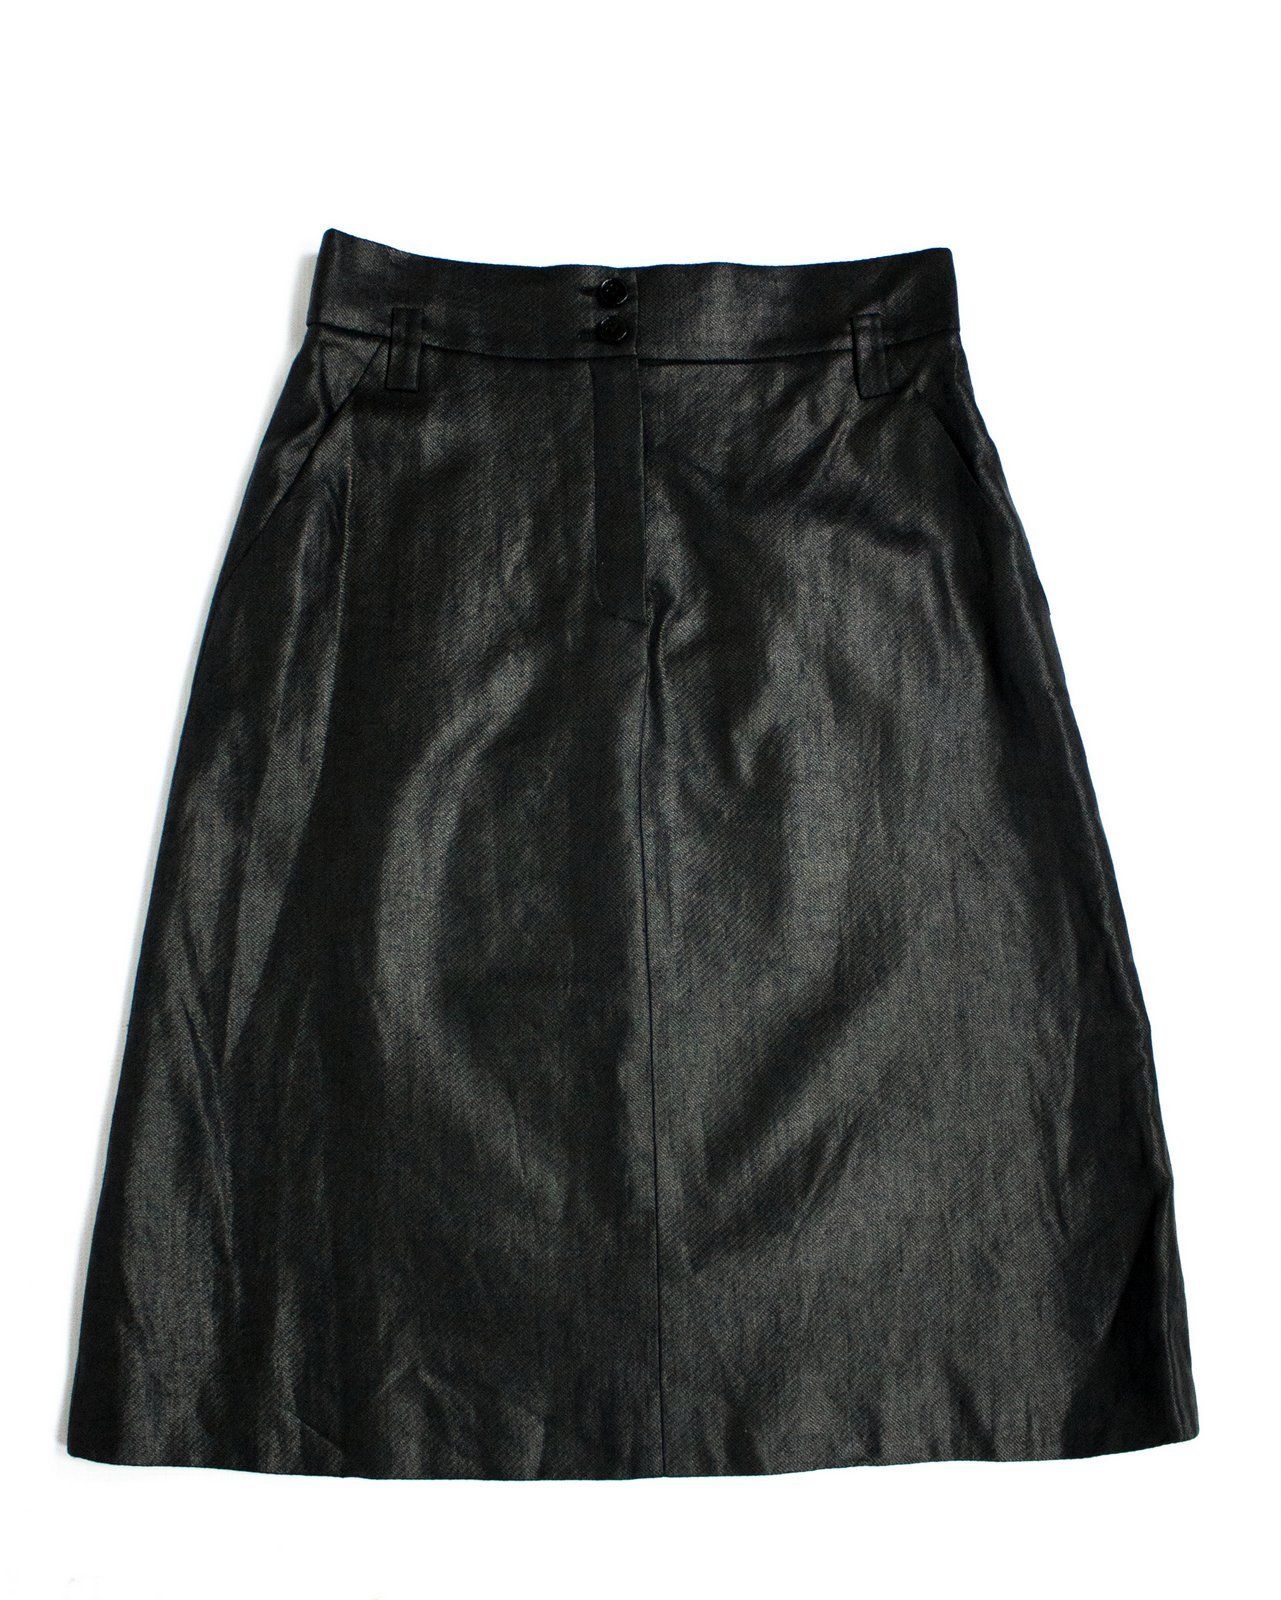 SONIA RYKIEL 100% linen A-line Black Skirt SIZE L, US 10 - secondfirst